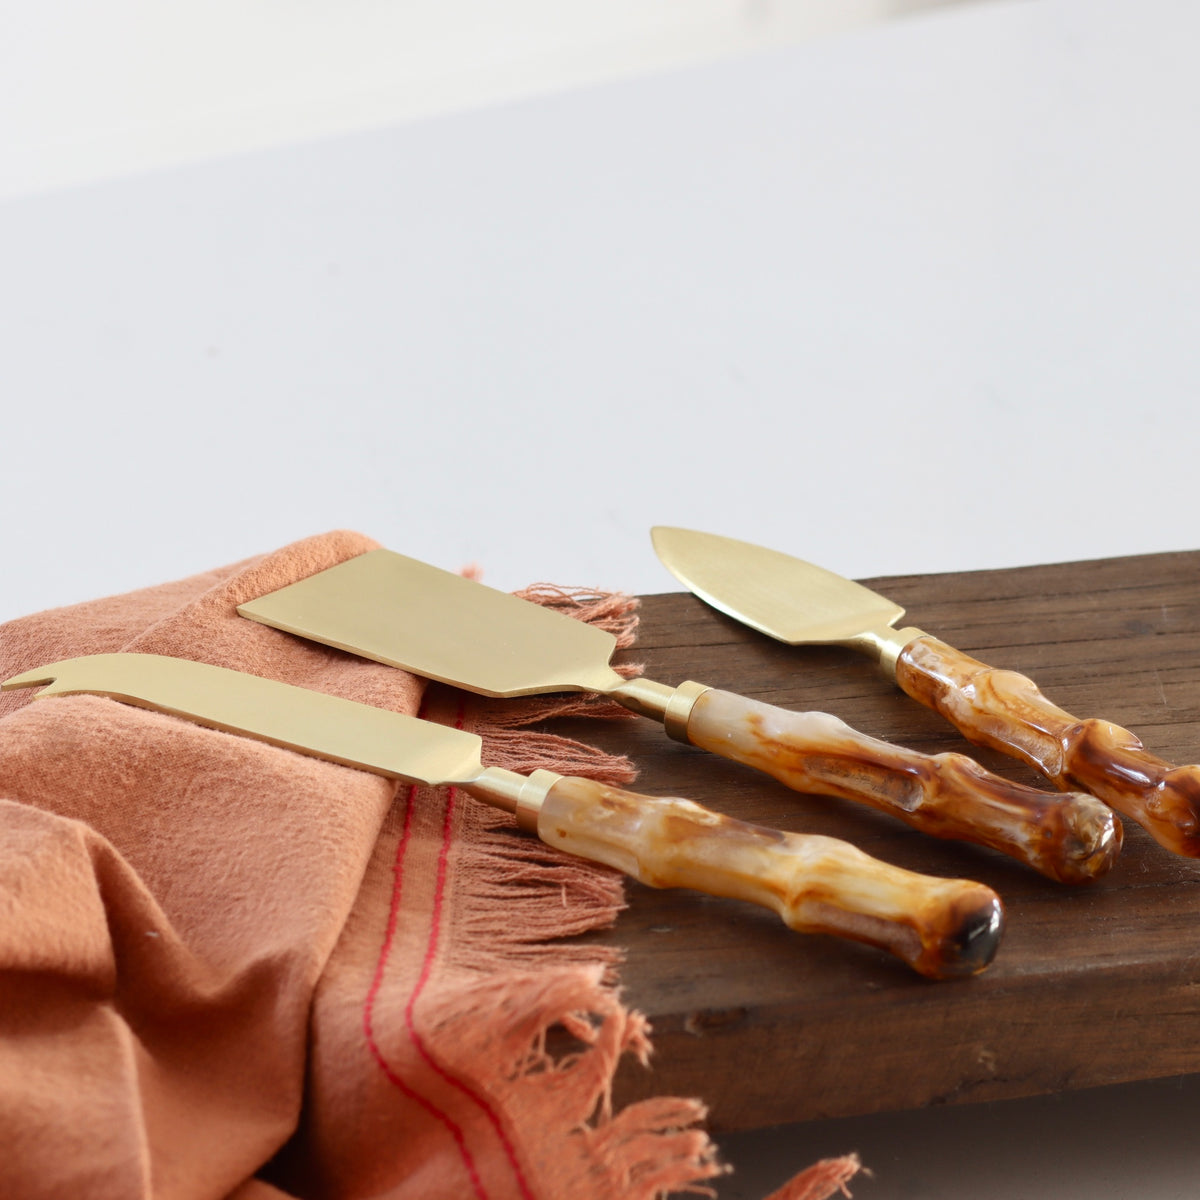 Gold Stainless Steel and Resin Cheese Knives - Holistic Habitat 